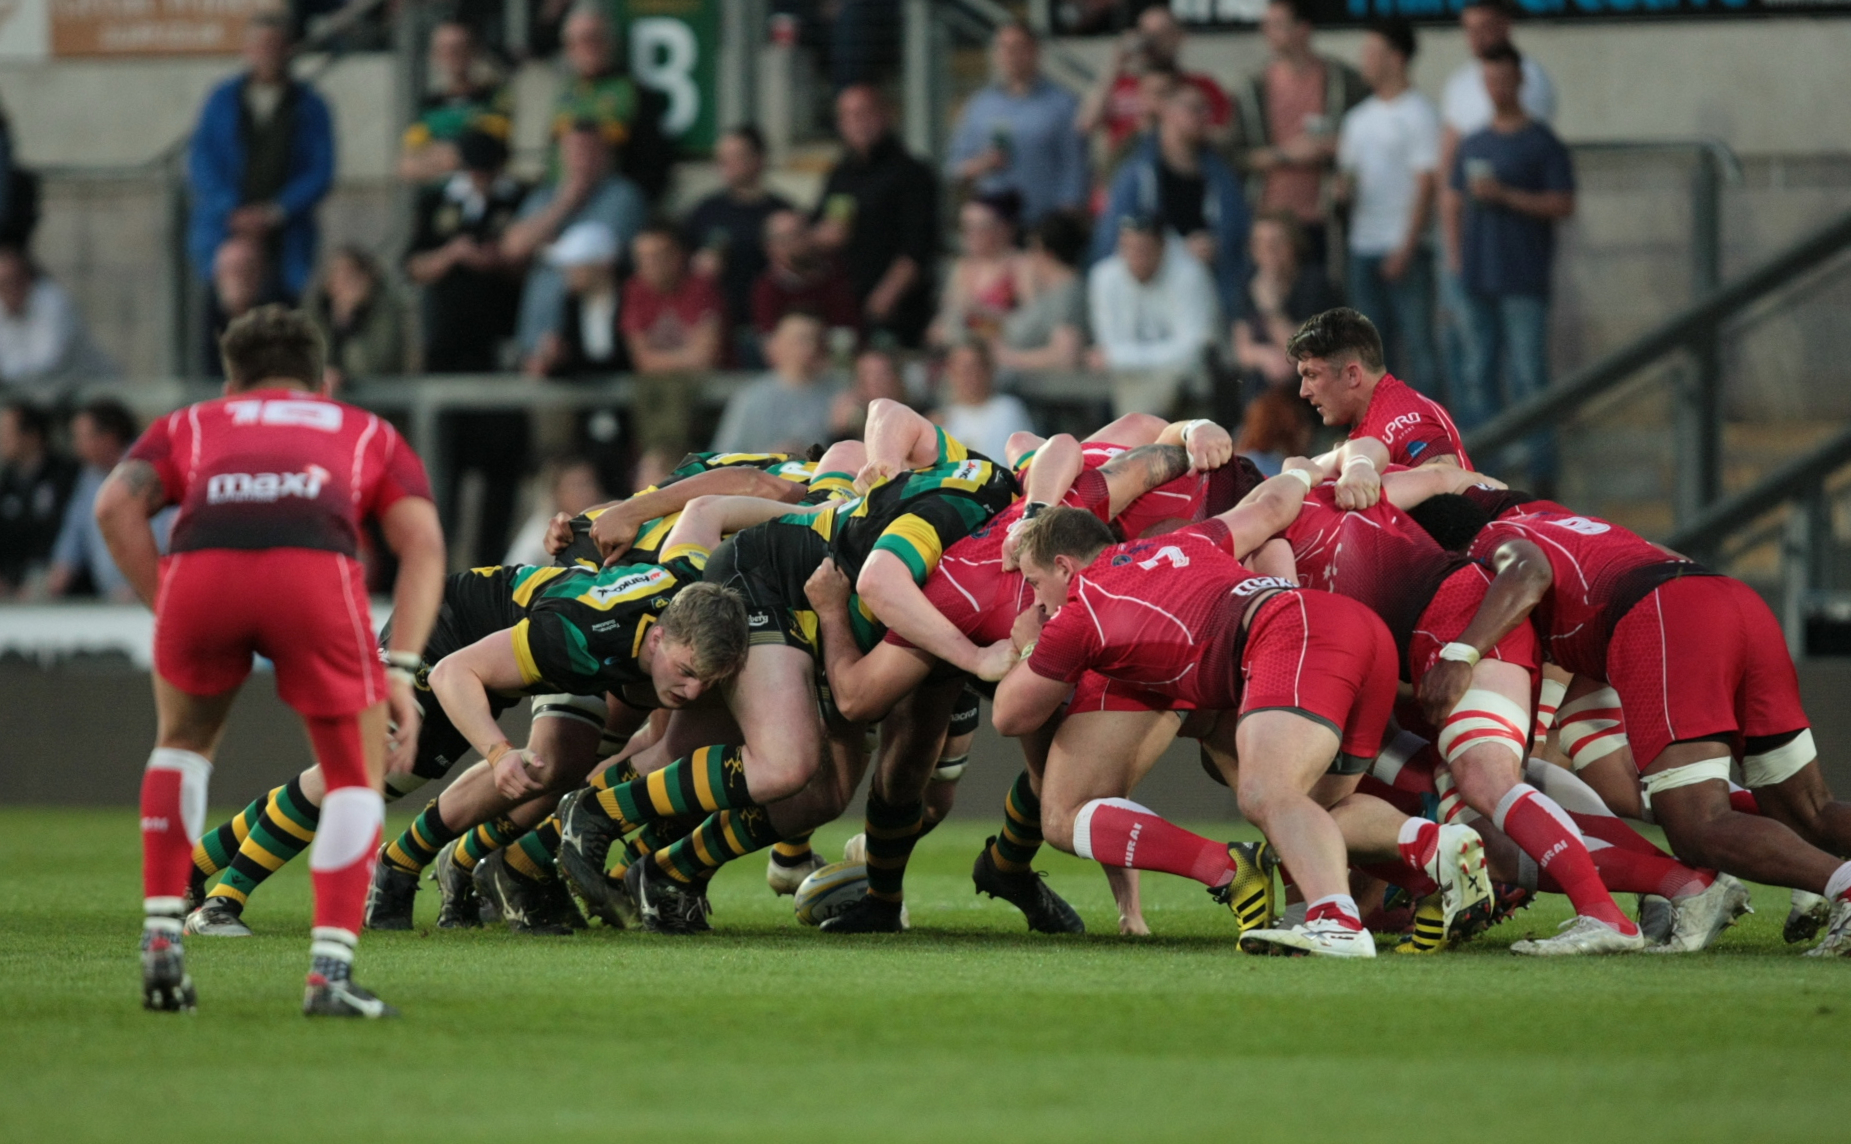 Army team ready to contribute to rugby history